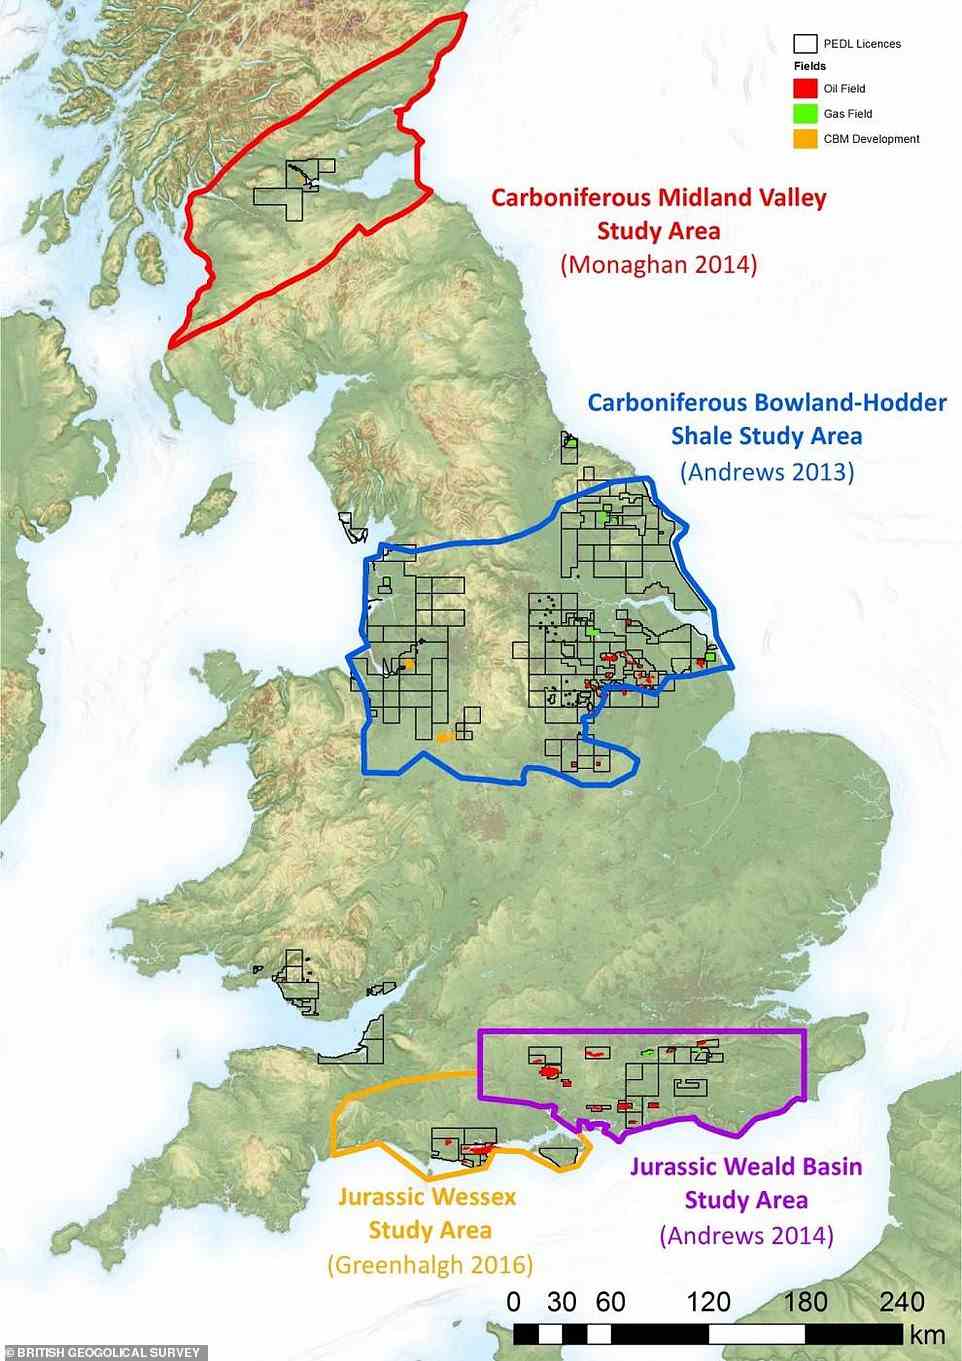 Four areas in the UK have been identified as potentially viable for the commercial extraction of shale gas: the Bowland-Hodder area in Northwest England, the Midland Valley in Scotland, the Weald Basin in Southern England, and the Wessex area in Southern England